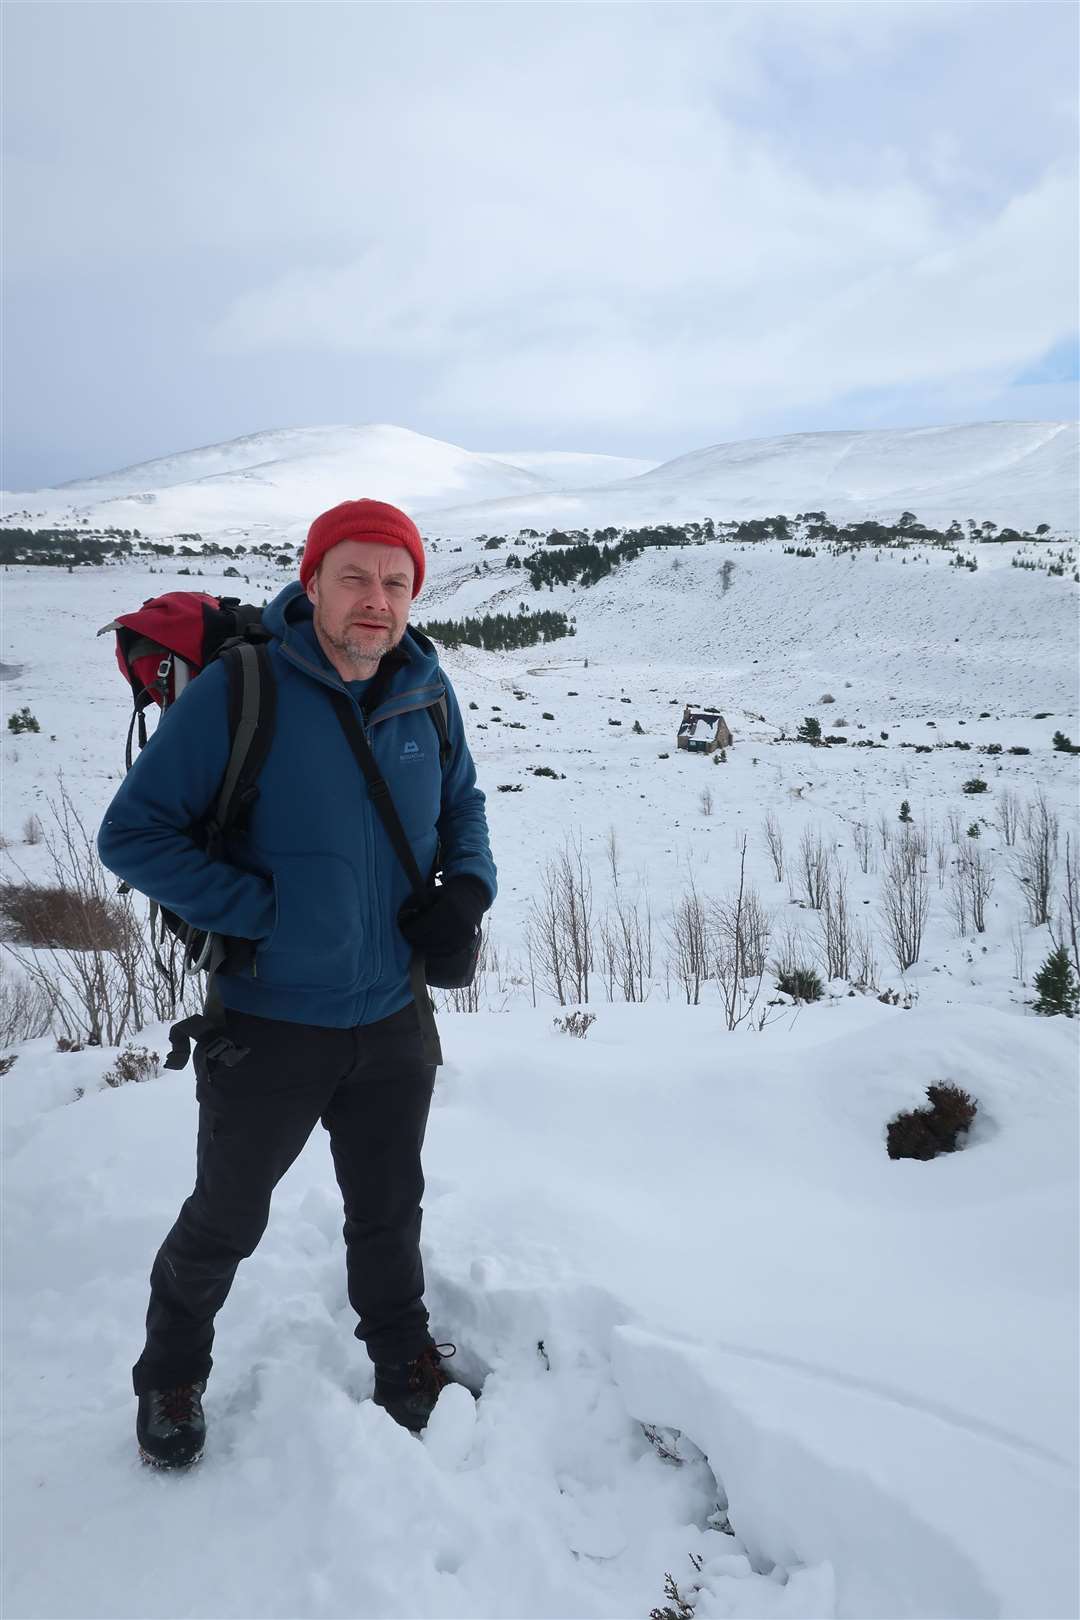 Geoff Allan on the path up to Meall a' Bhuachaille with Ryvoan bothy below.